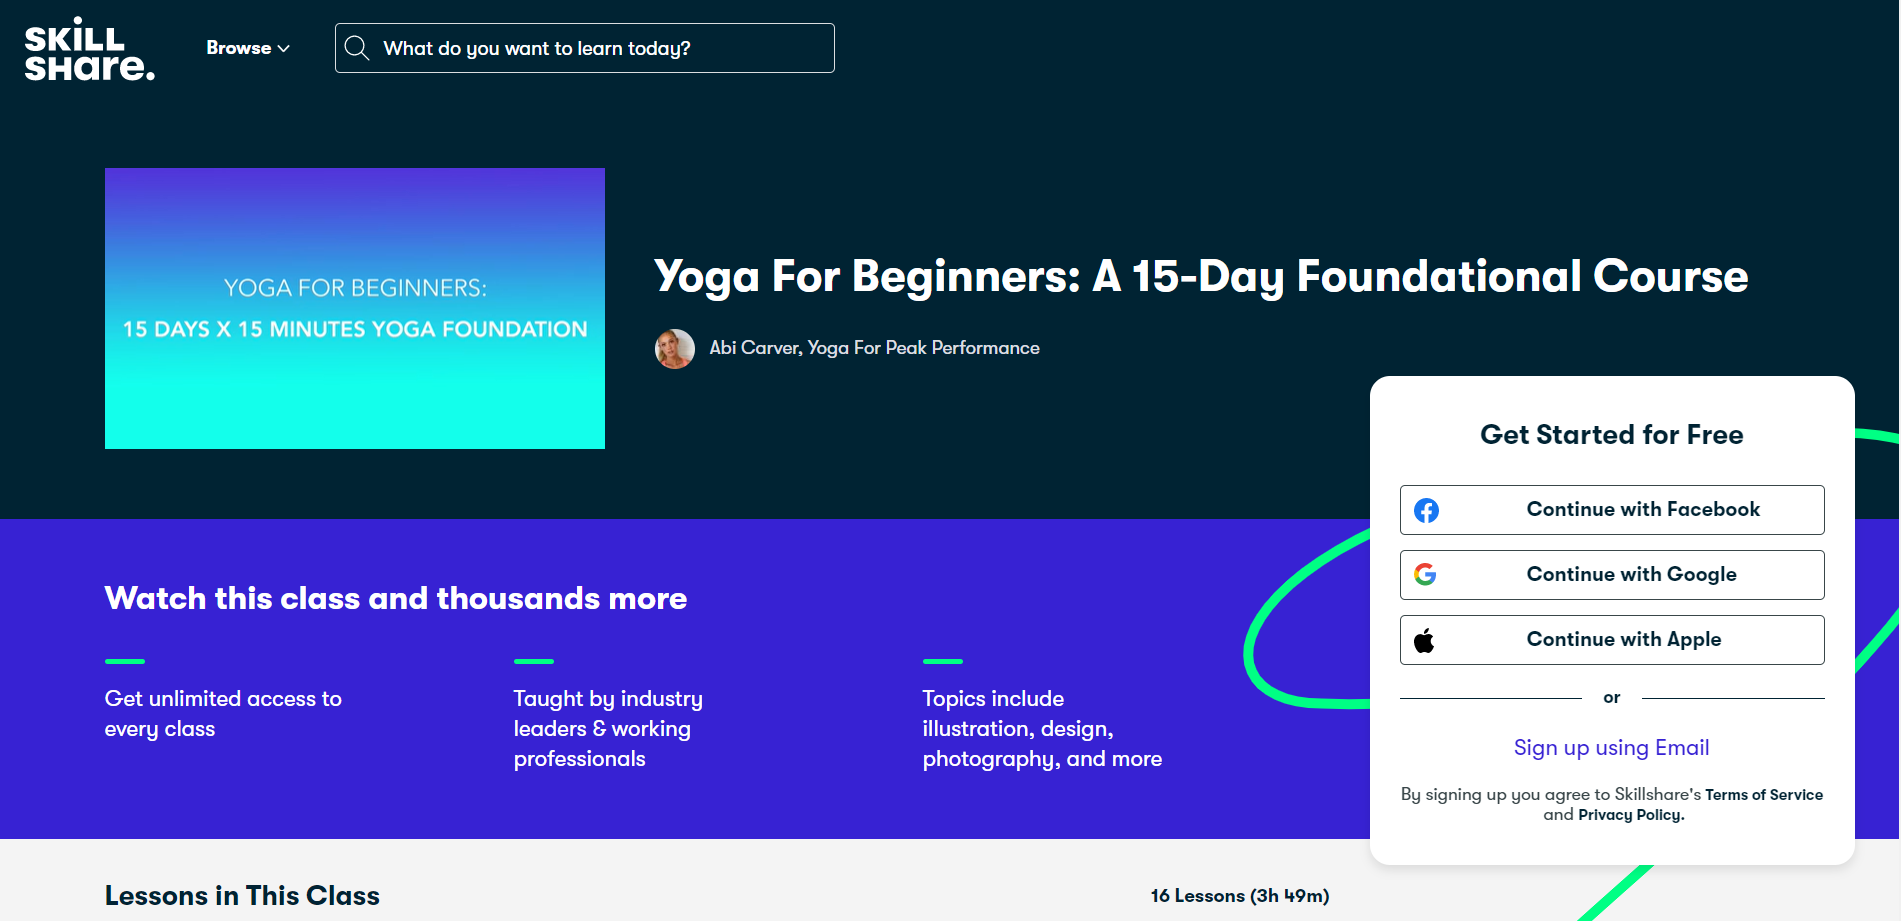 Yoga for Beginners A 15-Day Foundational Course